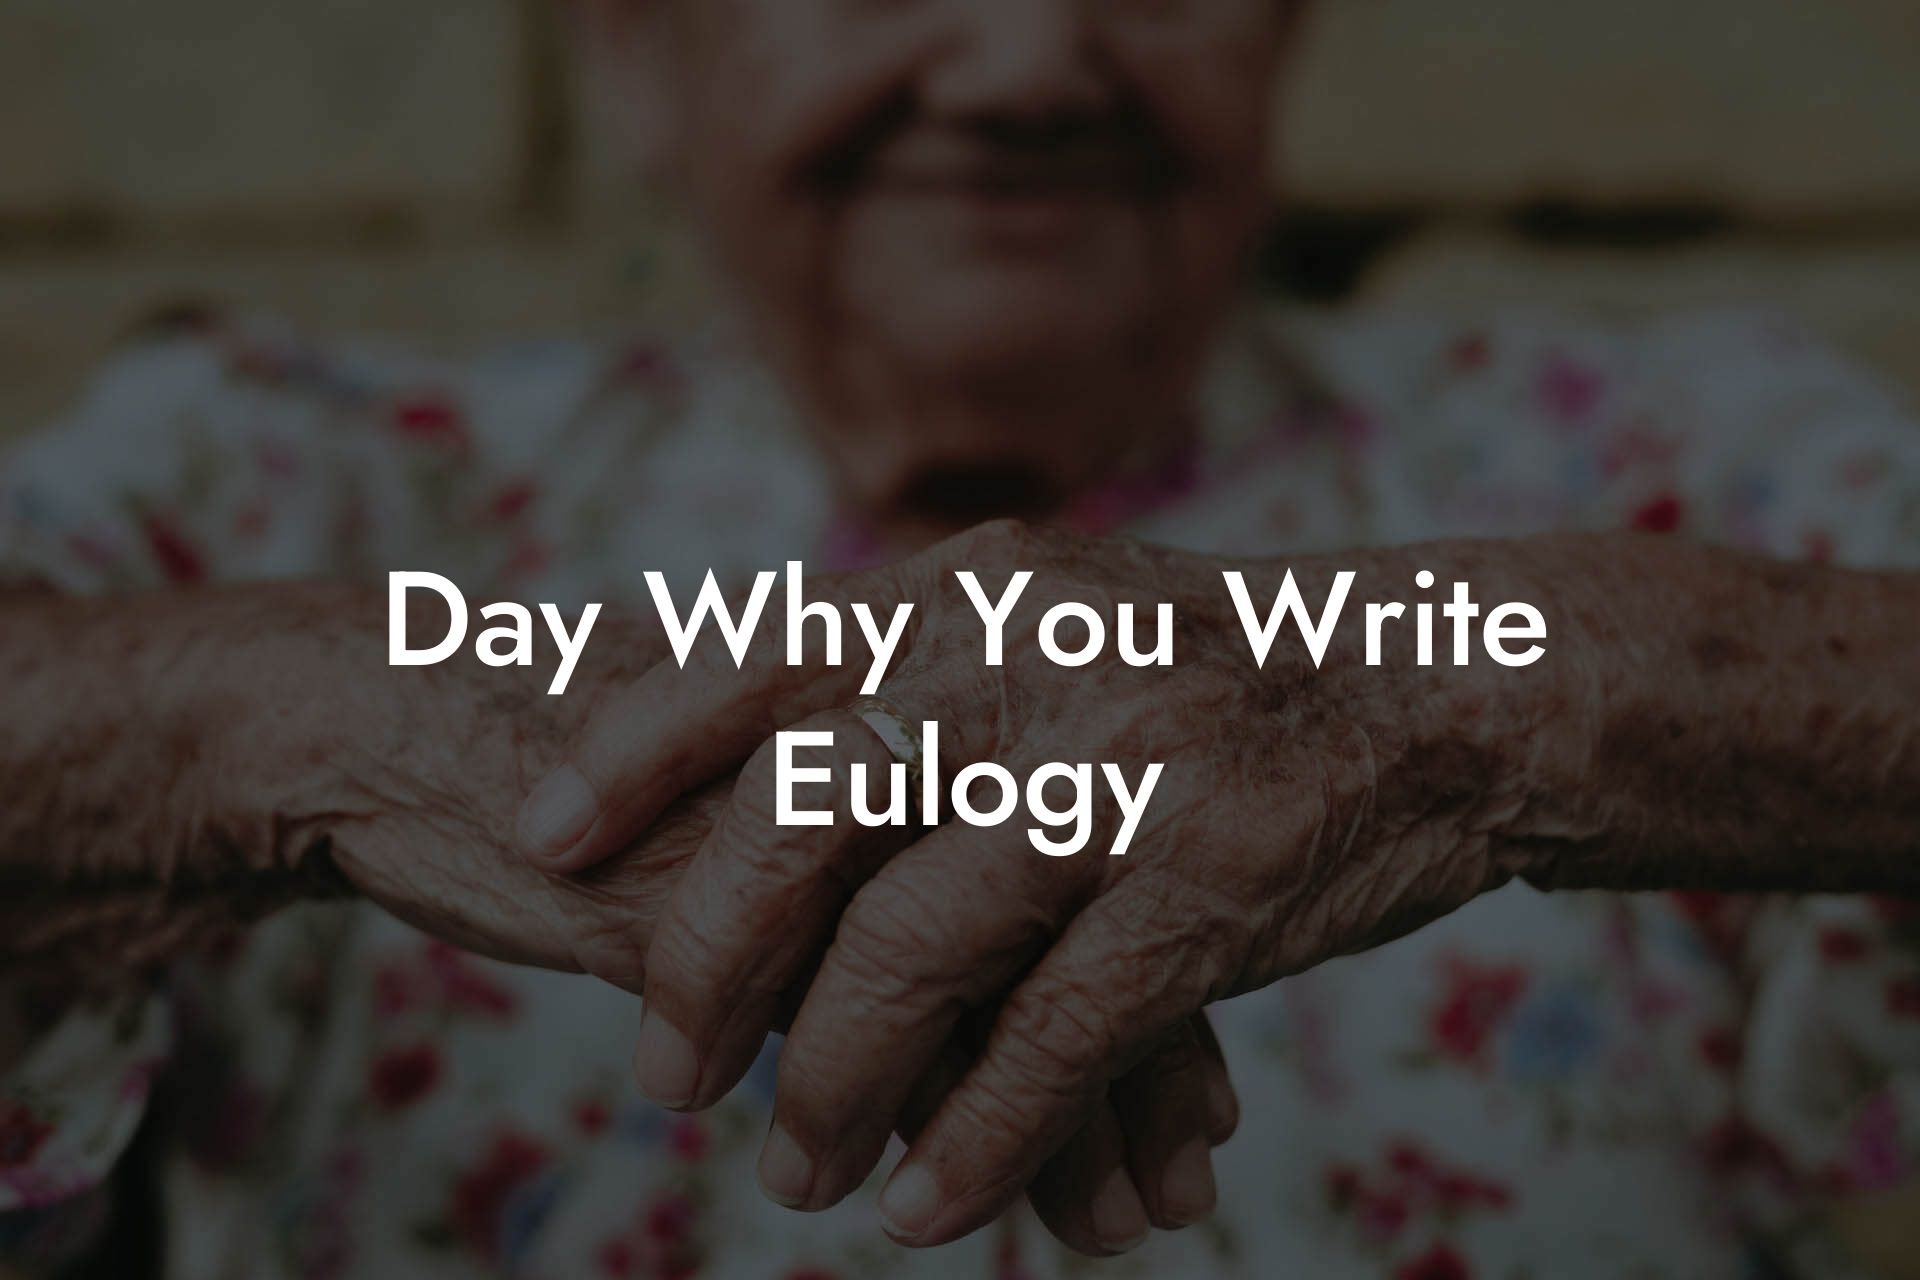 Day Why You Write Eulogy